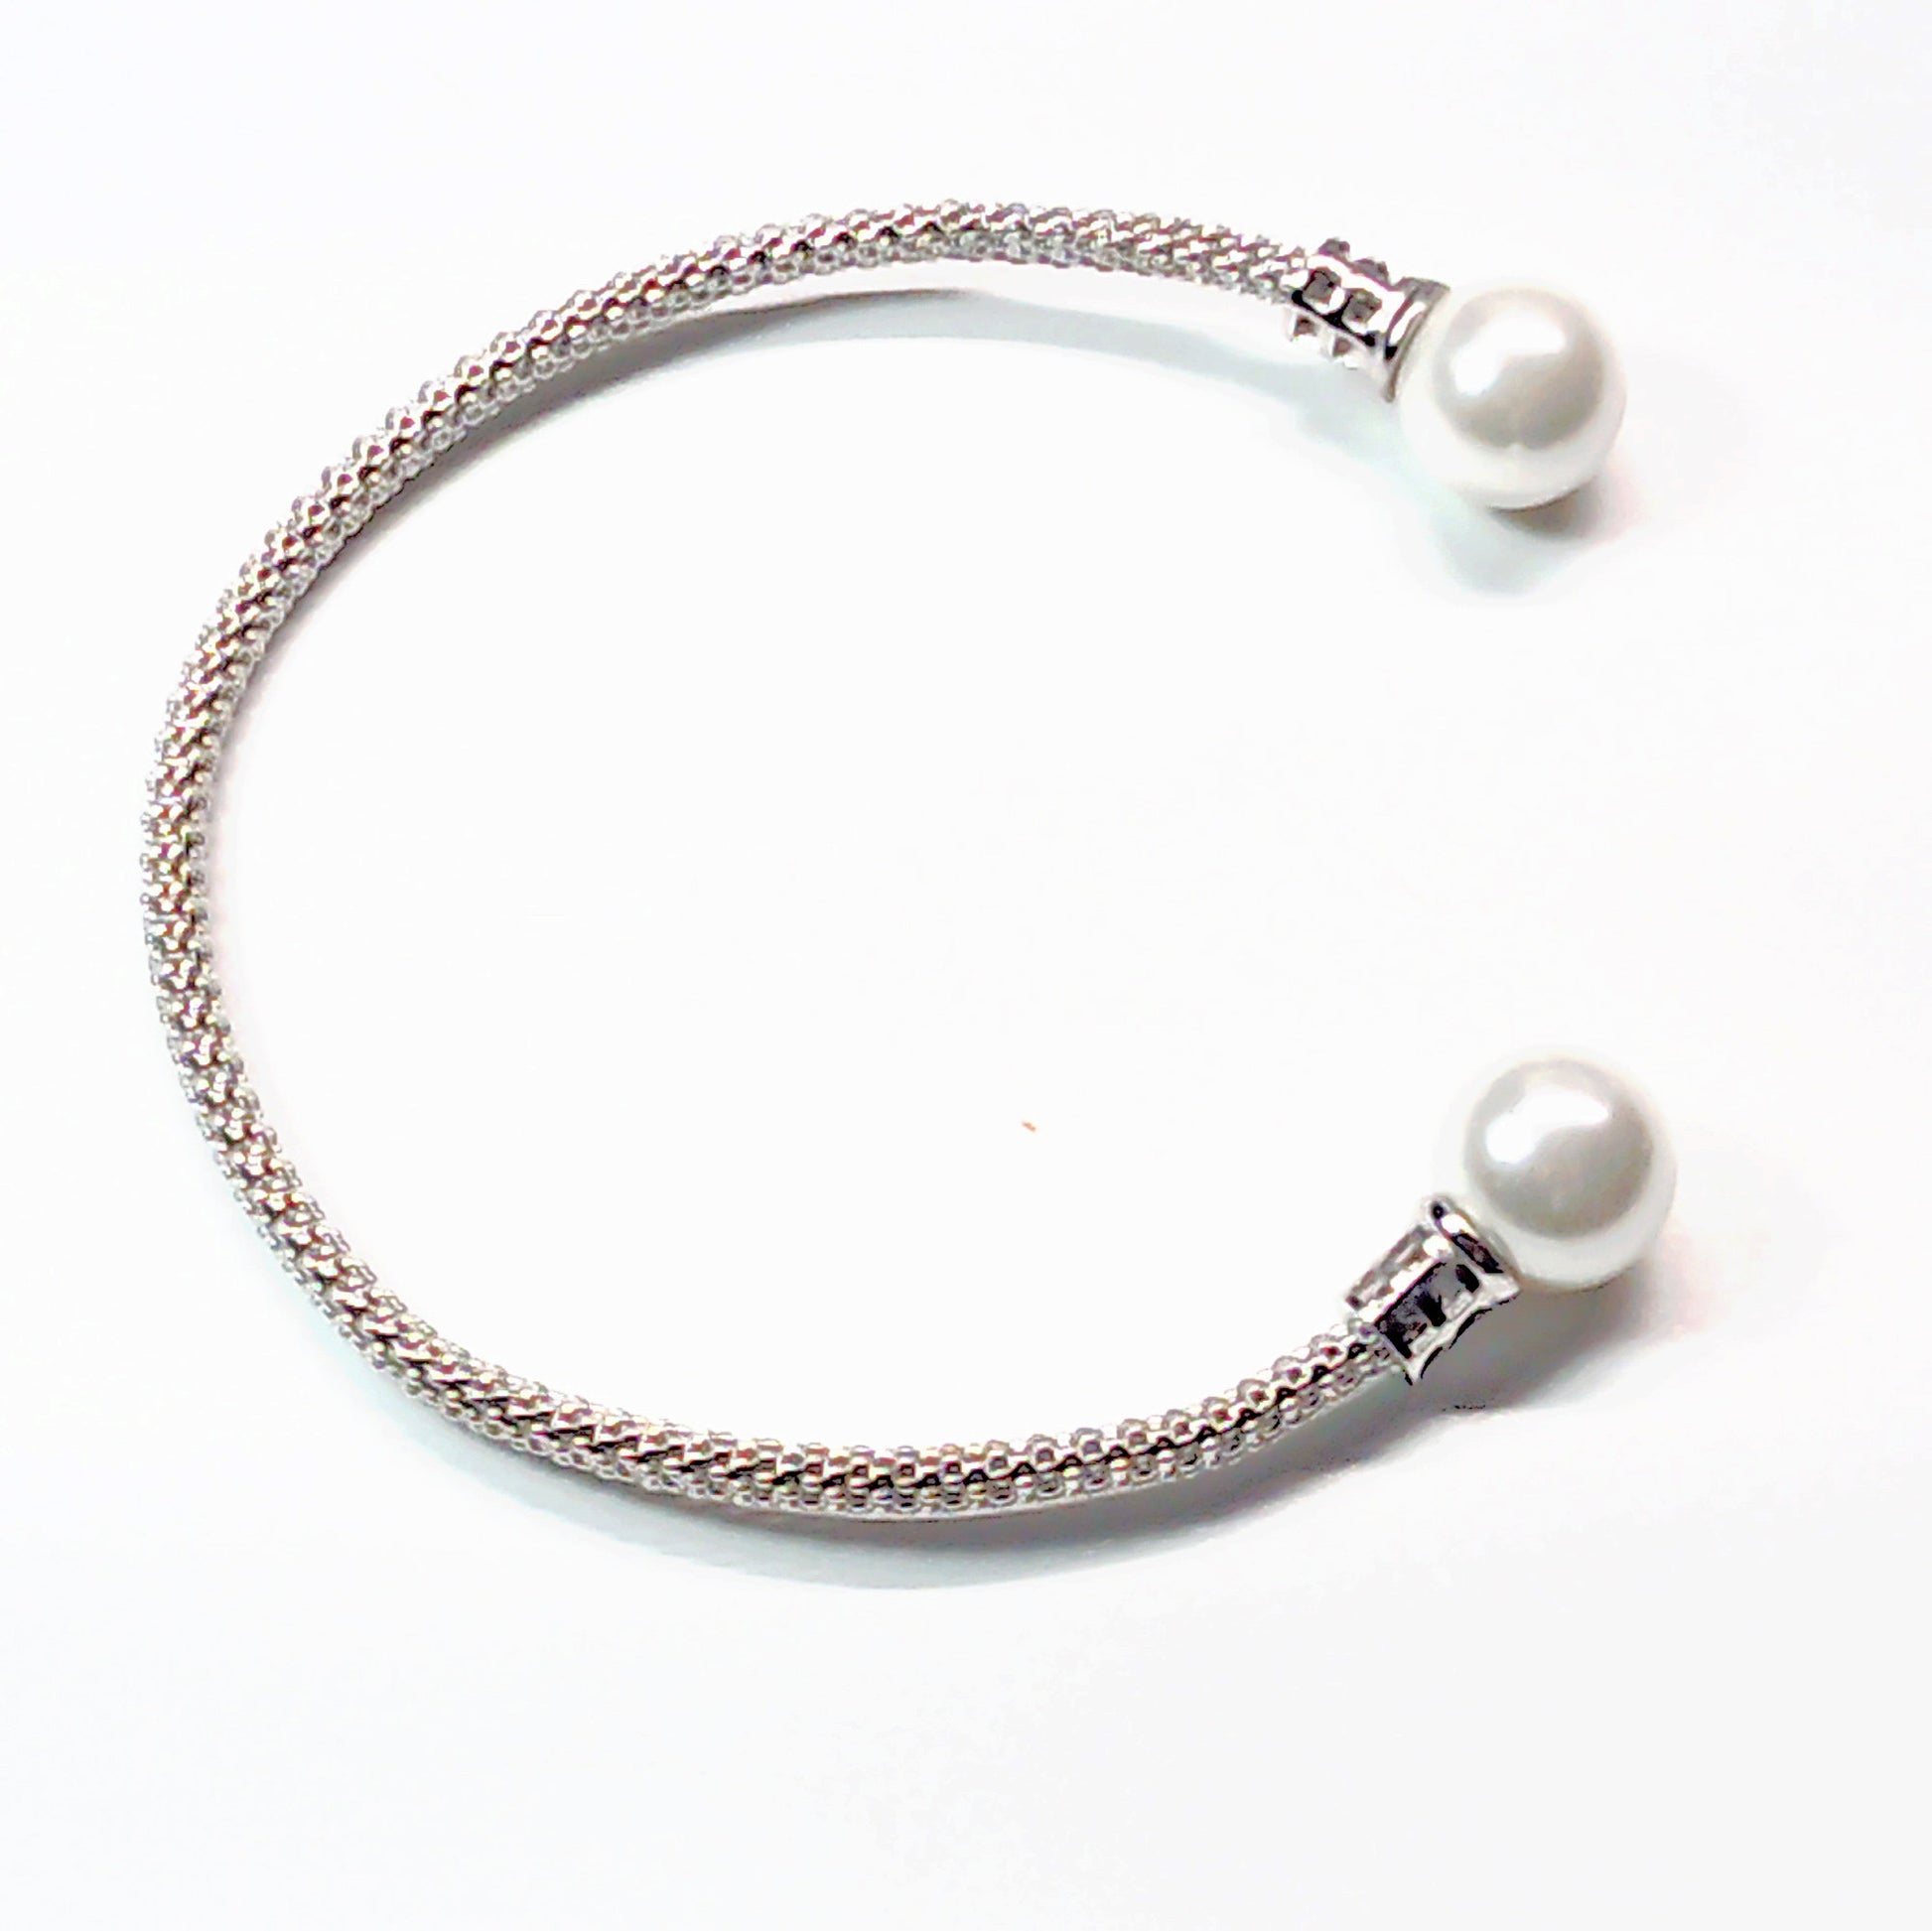 sterling silver mesh bracelet with genuine fresh water pearls - Providence silver gold jewelry usa